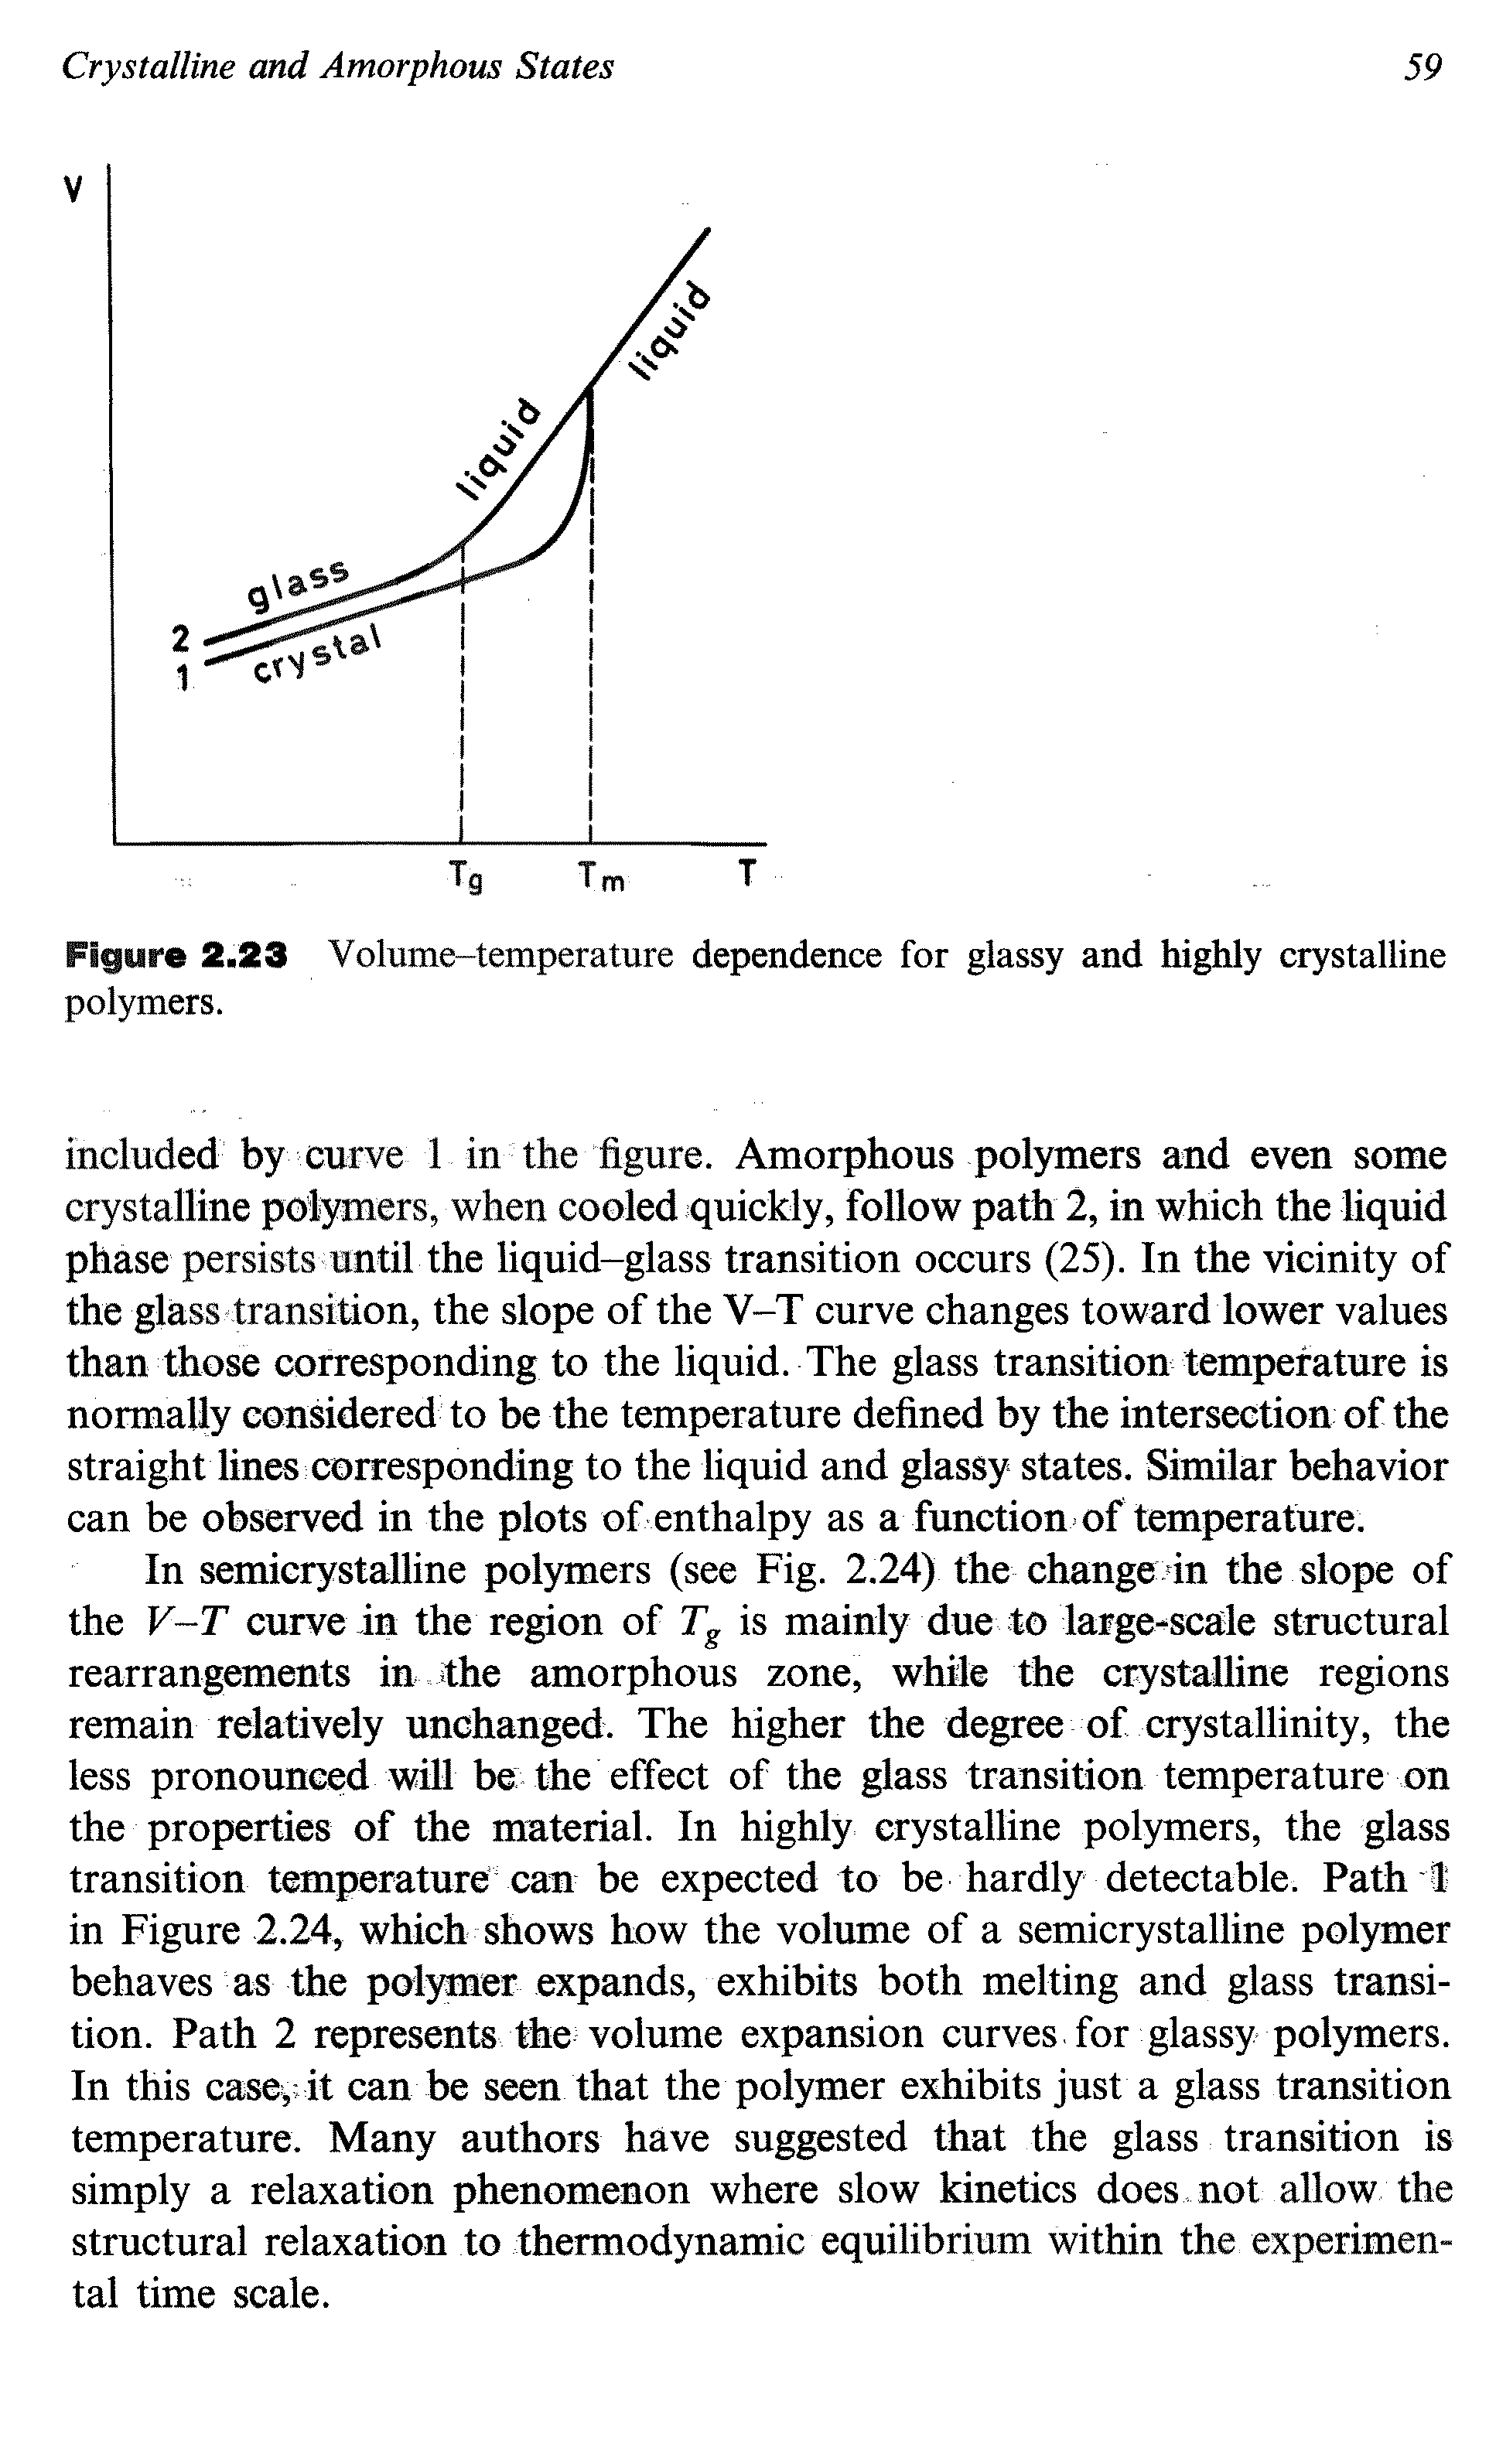 Figure 2.23 Volume-temperature dependence for glassy and highly crystalline polymers.